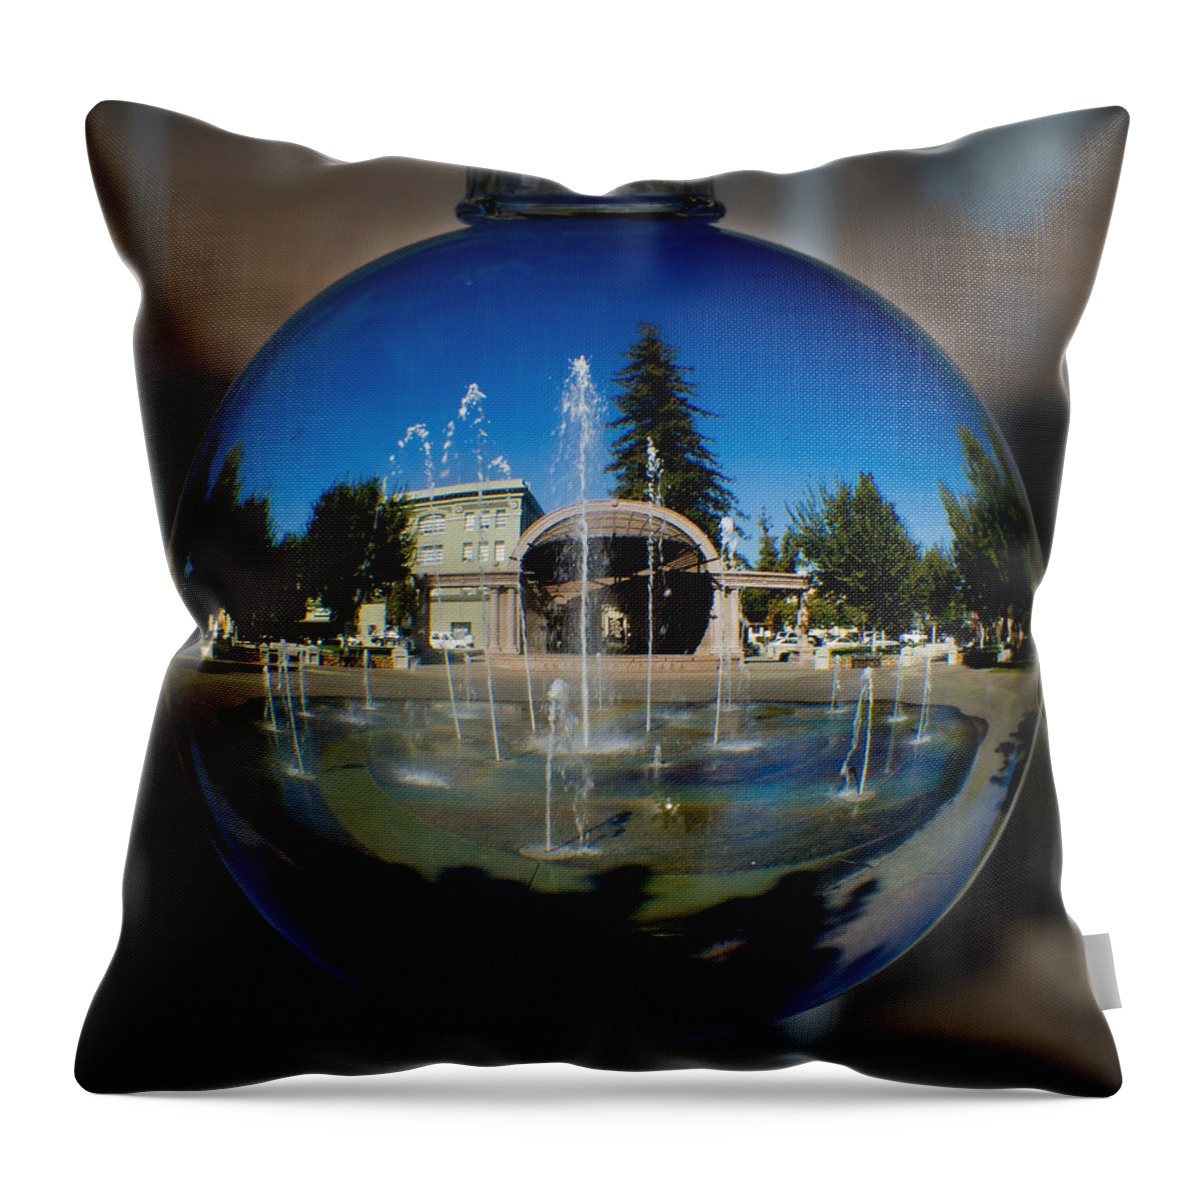 Fountain Throw Pillow featuring the photograph Chico City Plaza by Robert Woodward